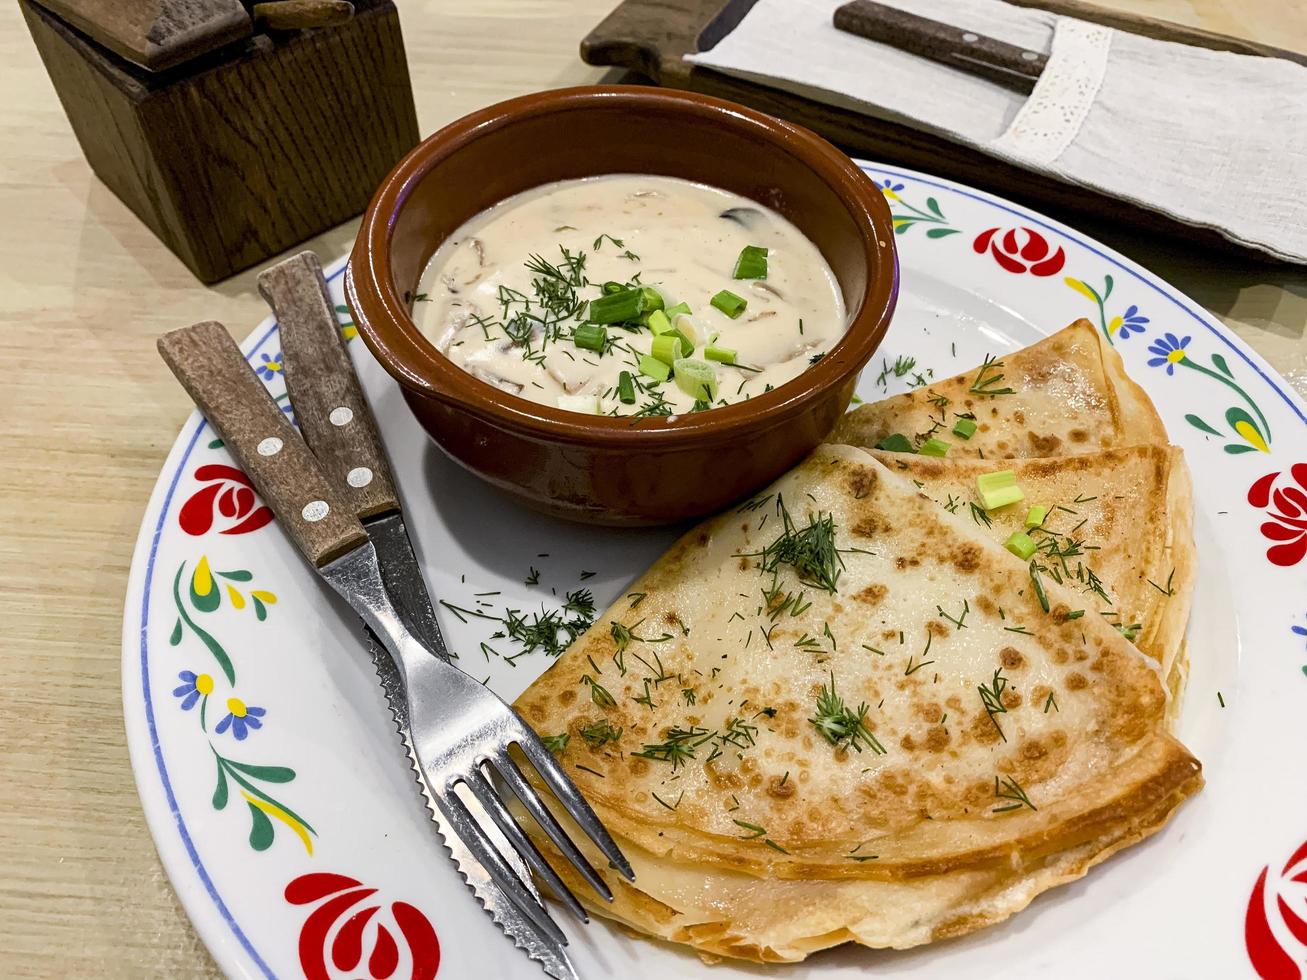 lunch in cafe. Delicious pancakes with mushroom sauce photo